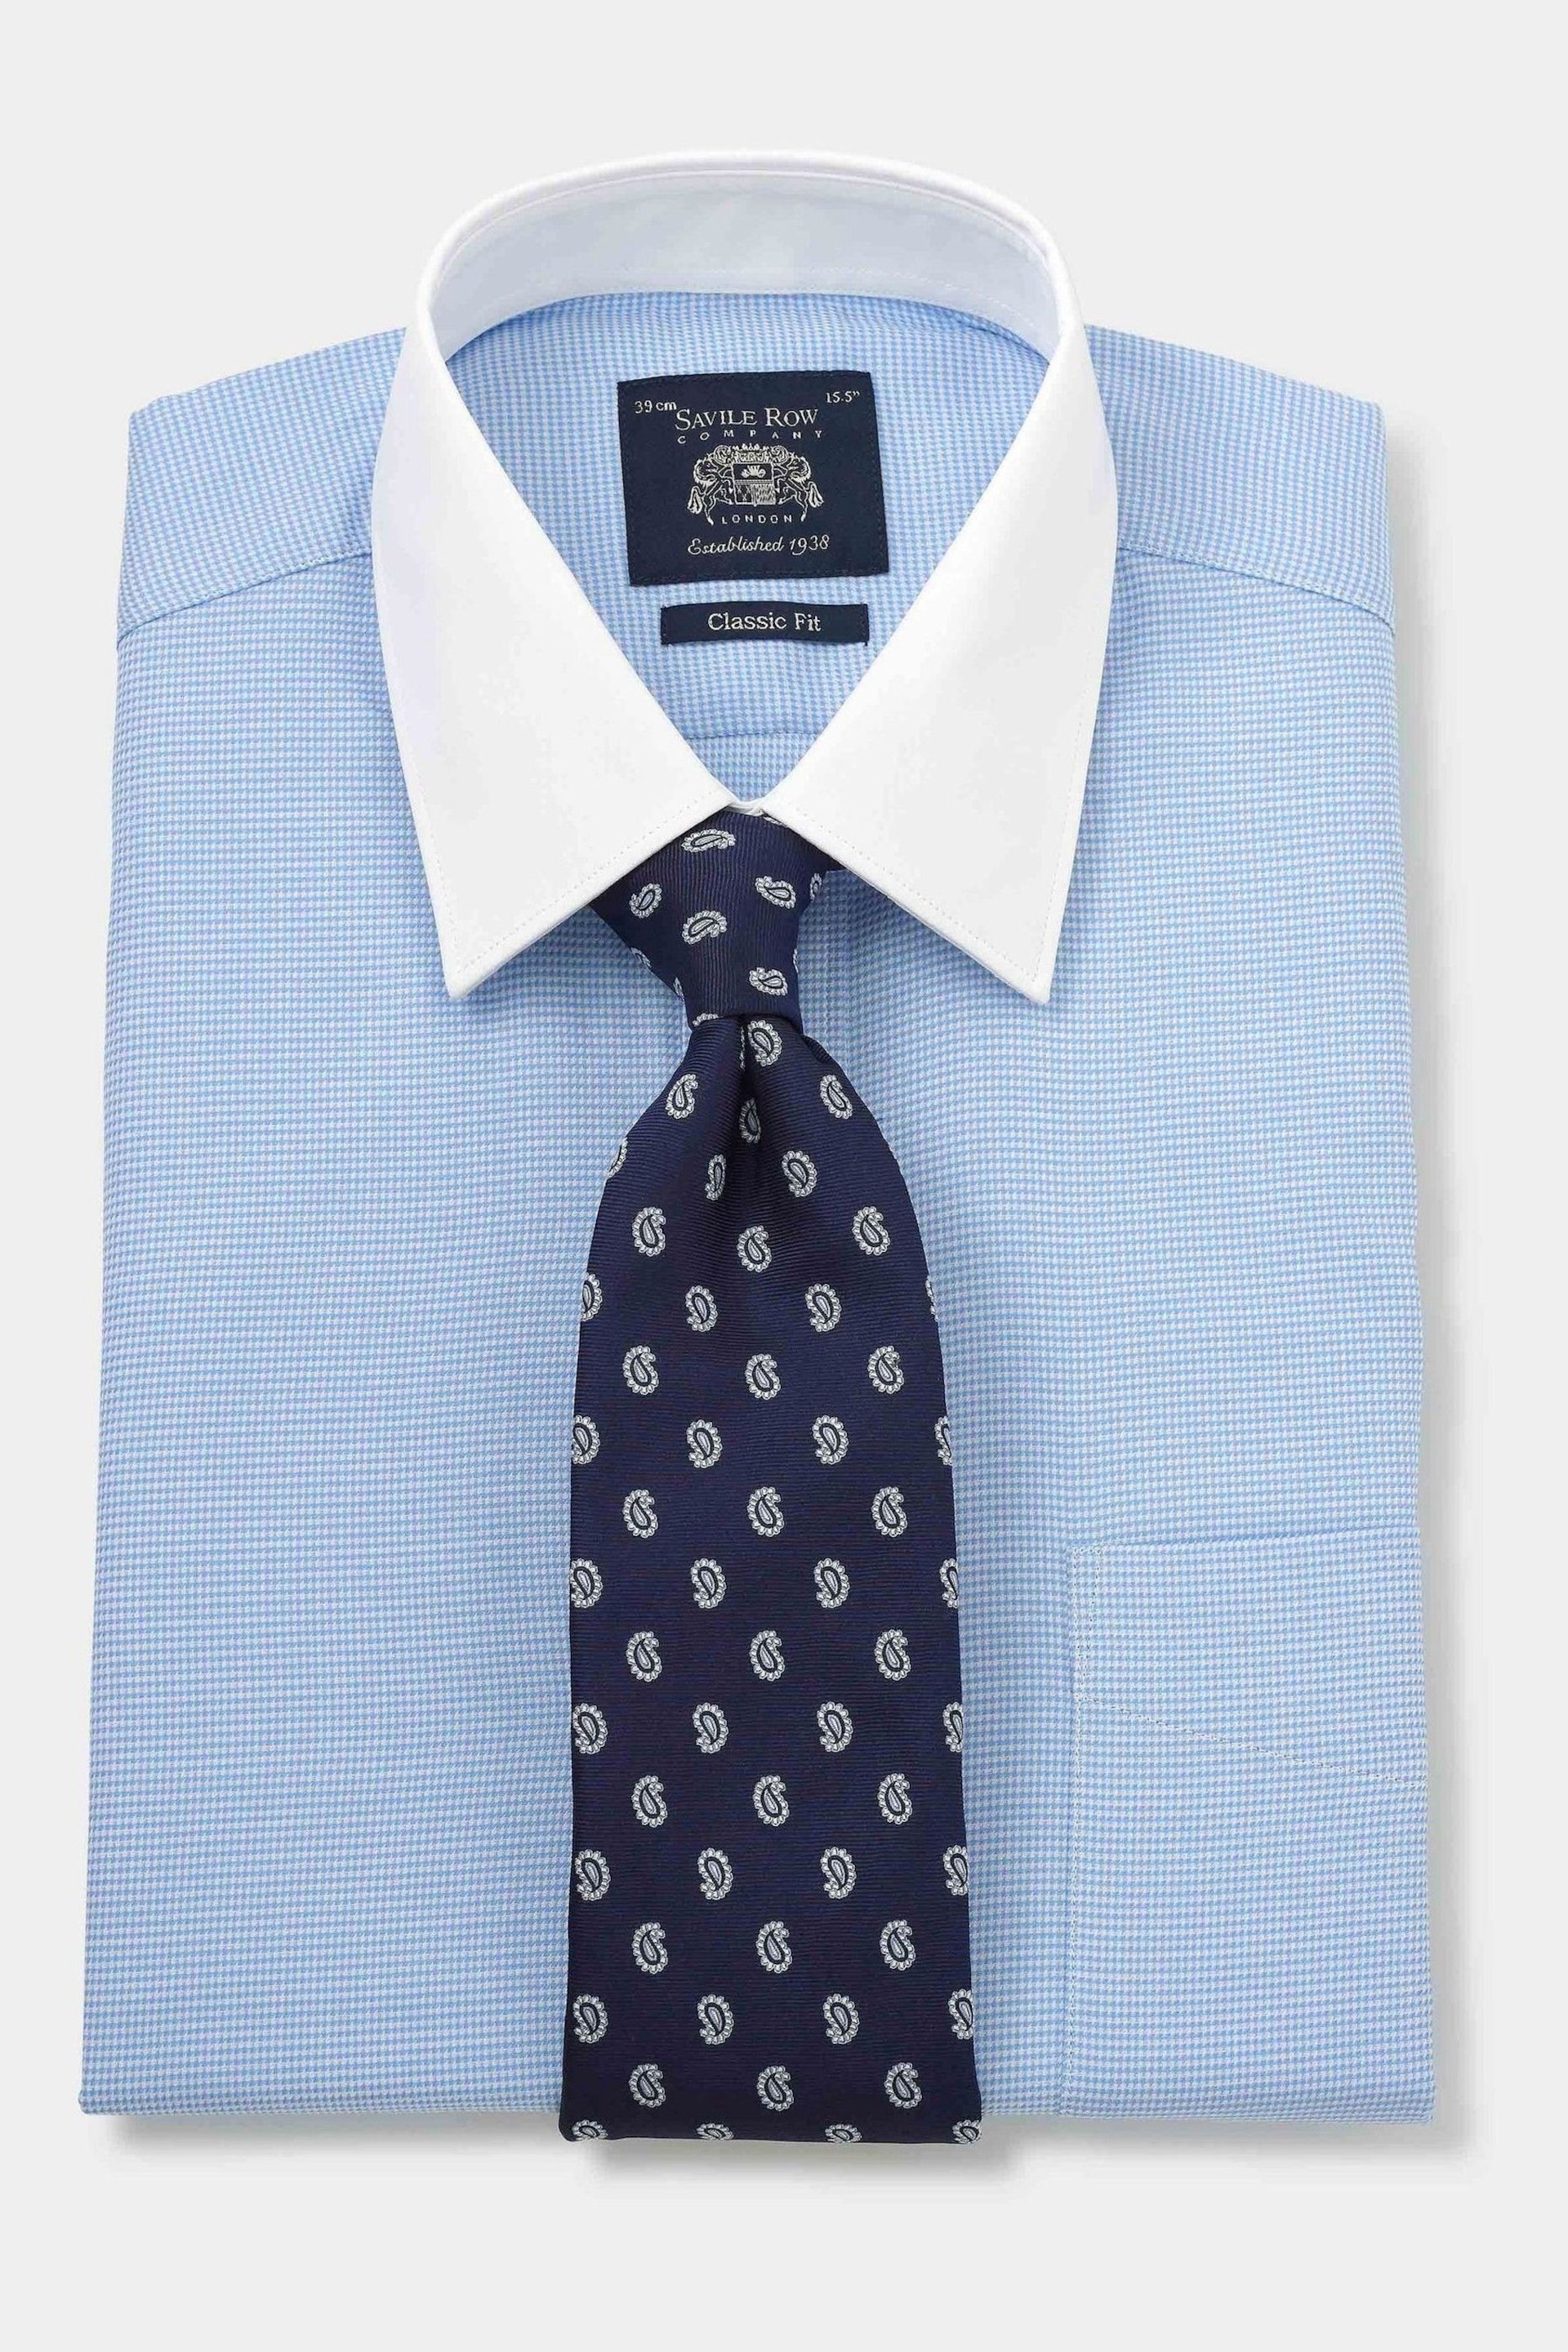 The Savile Row Company Classic Fit Blue Savile Row Blue Puppytooth Double Cuff Shirt - Image 3 of 6